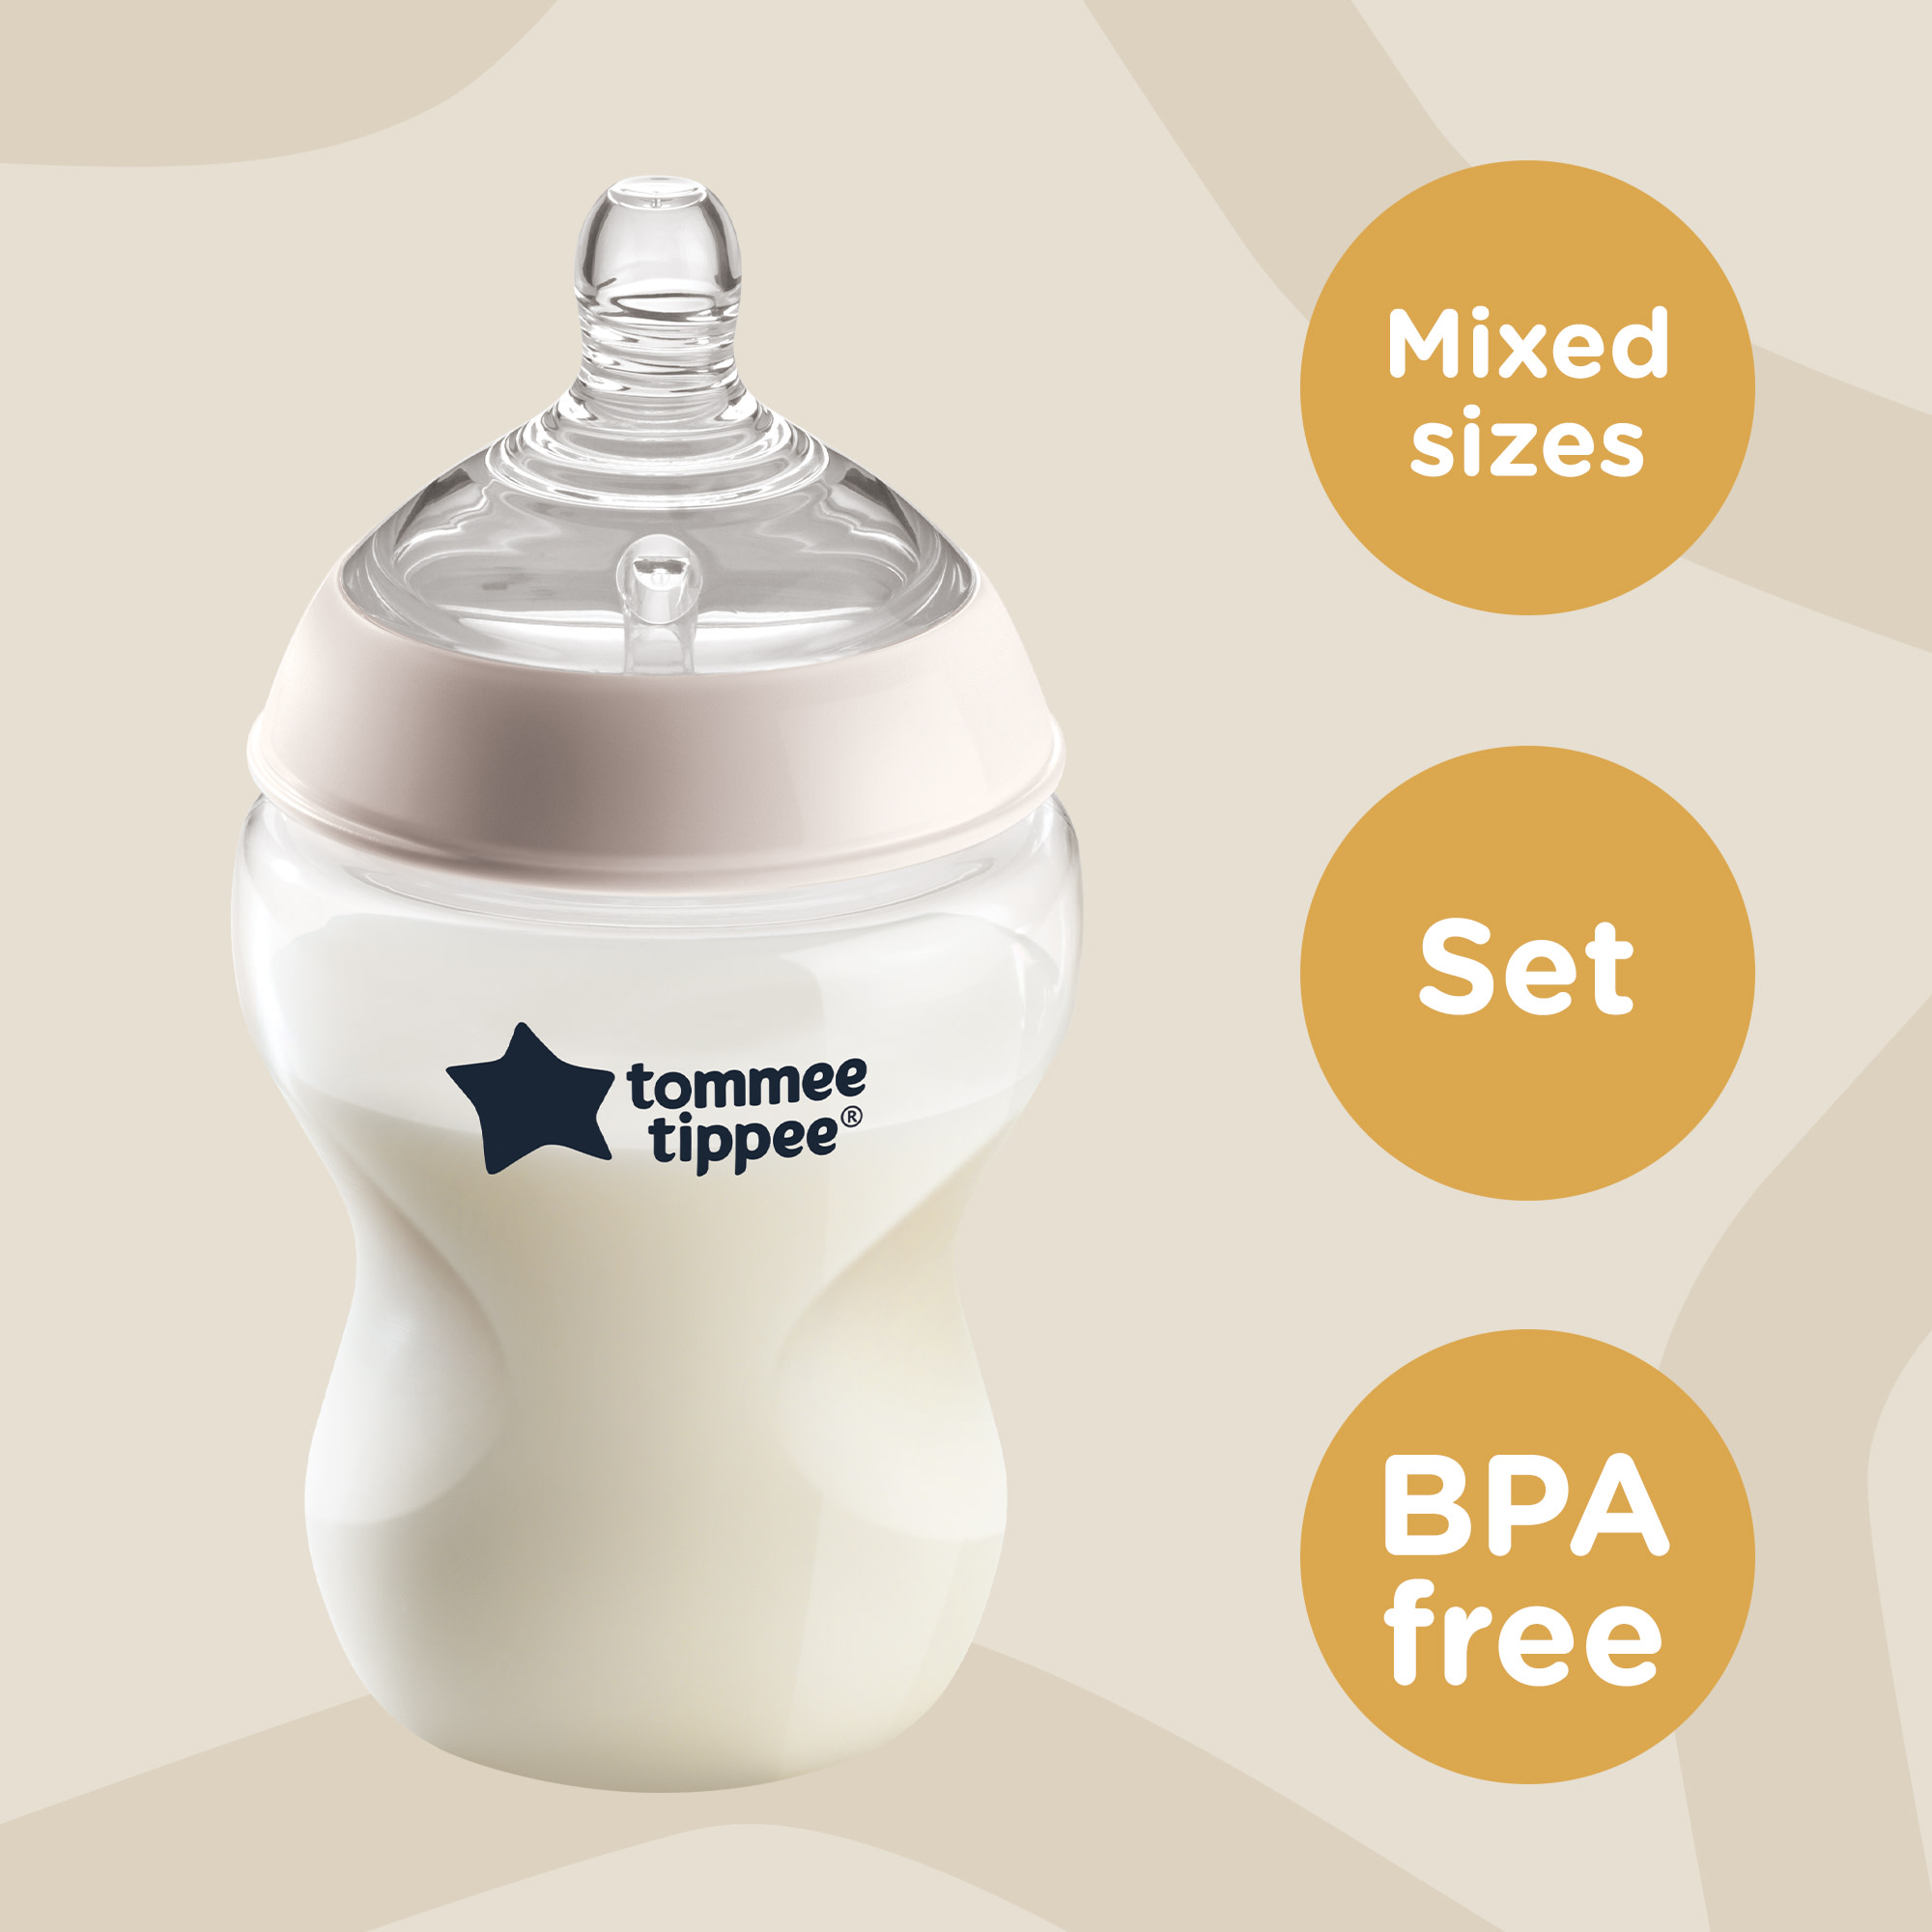 Tommee Tippee Closer to Nature 6 Pack (260ml) Anti-Colic Baby Bottles -  Blue